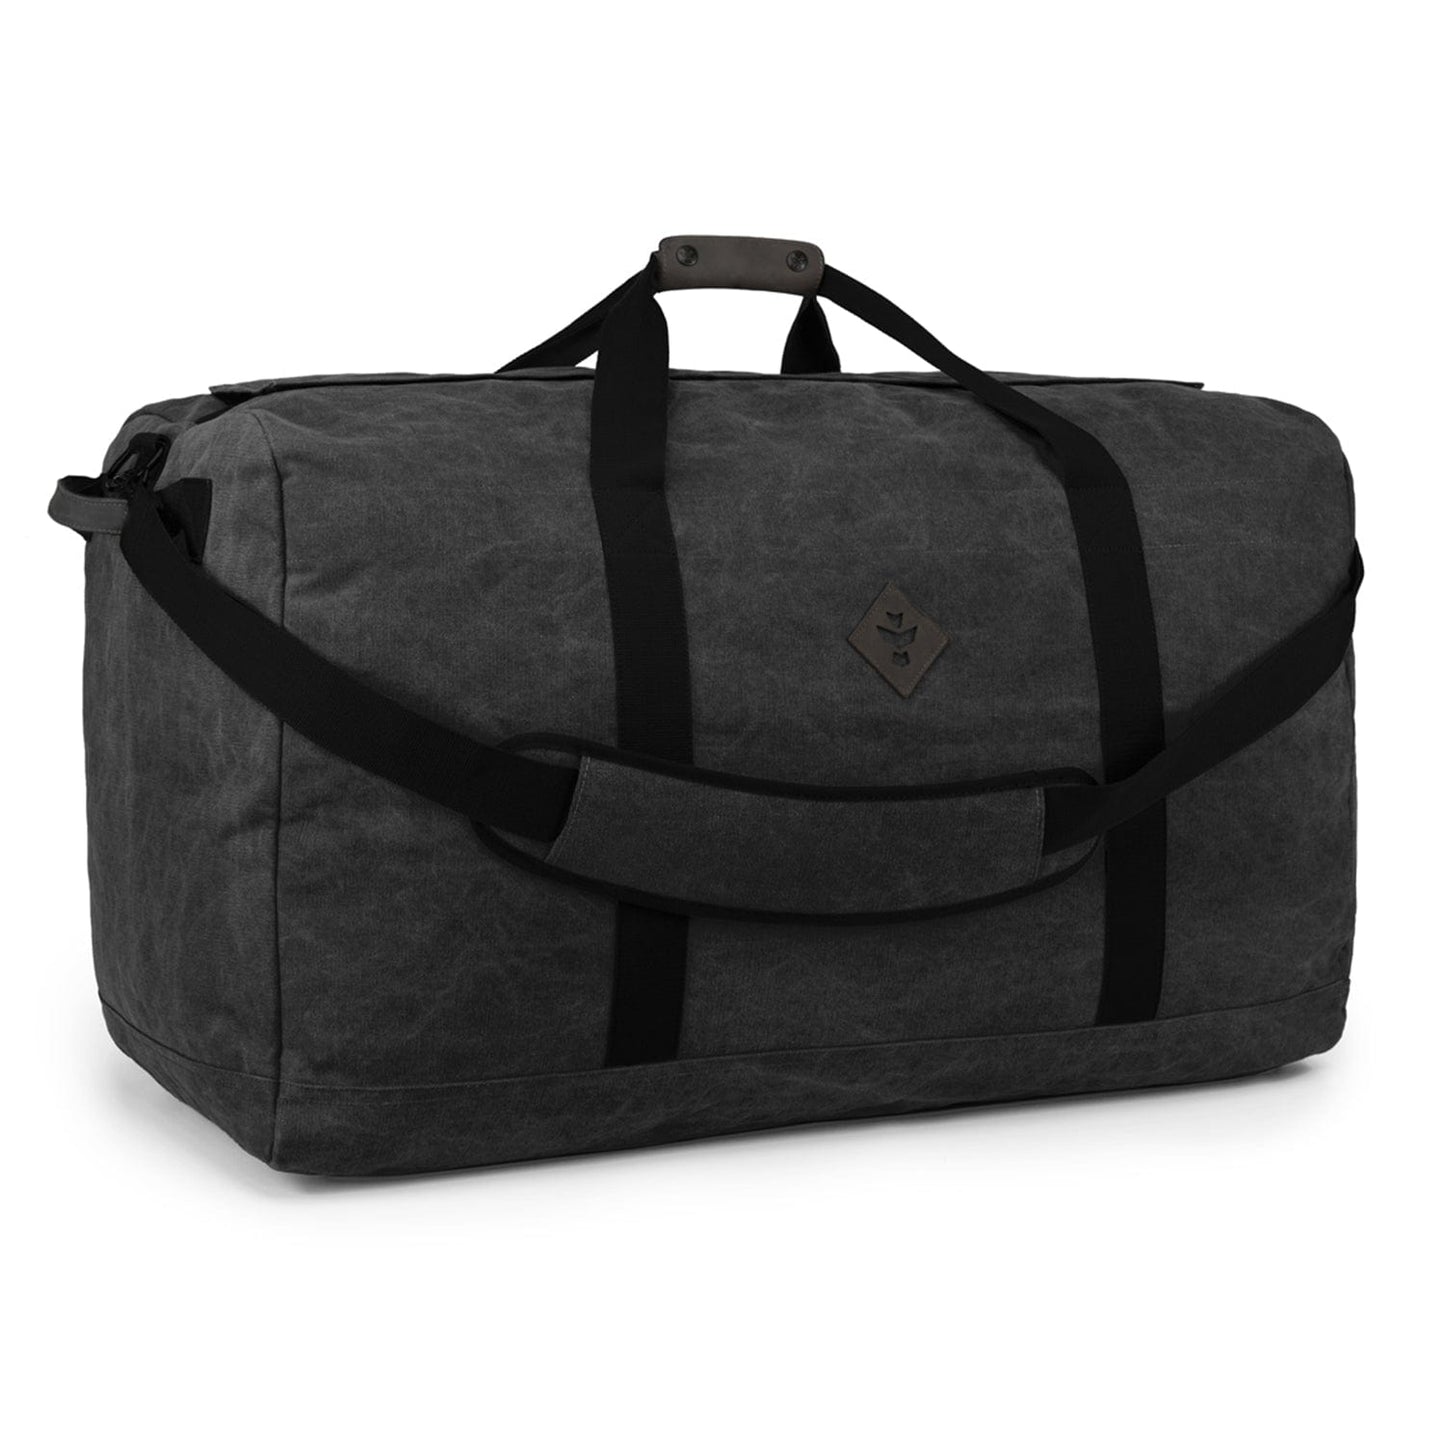 revelrysupply Smoke The Northerner - Smell Proof XL Duffle